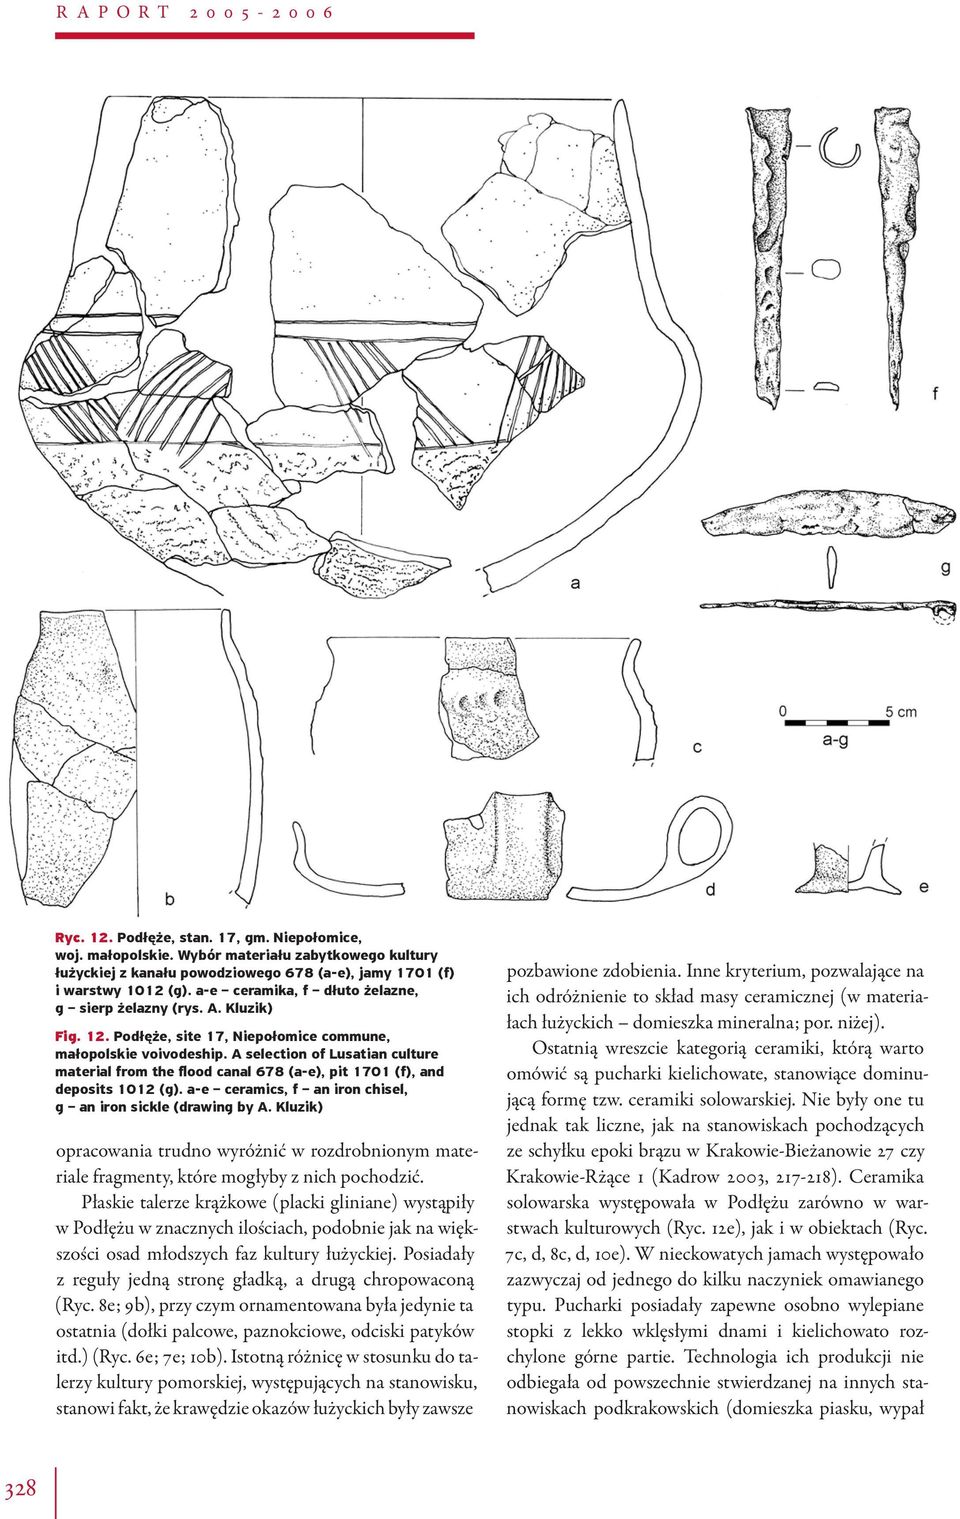 A selection of Lusatian culture material from the flood canal 678 (a-e), pit 1701 (f), and deposits 1012 (g). a-e ceramics, f an iron chisel, g an iron sickle (drawing by A.